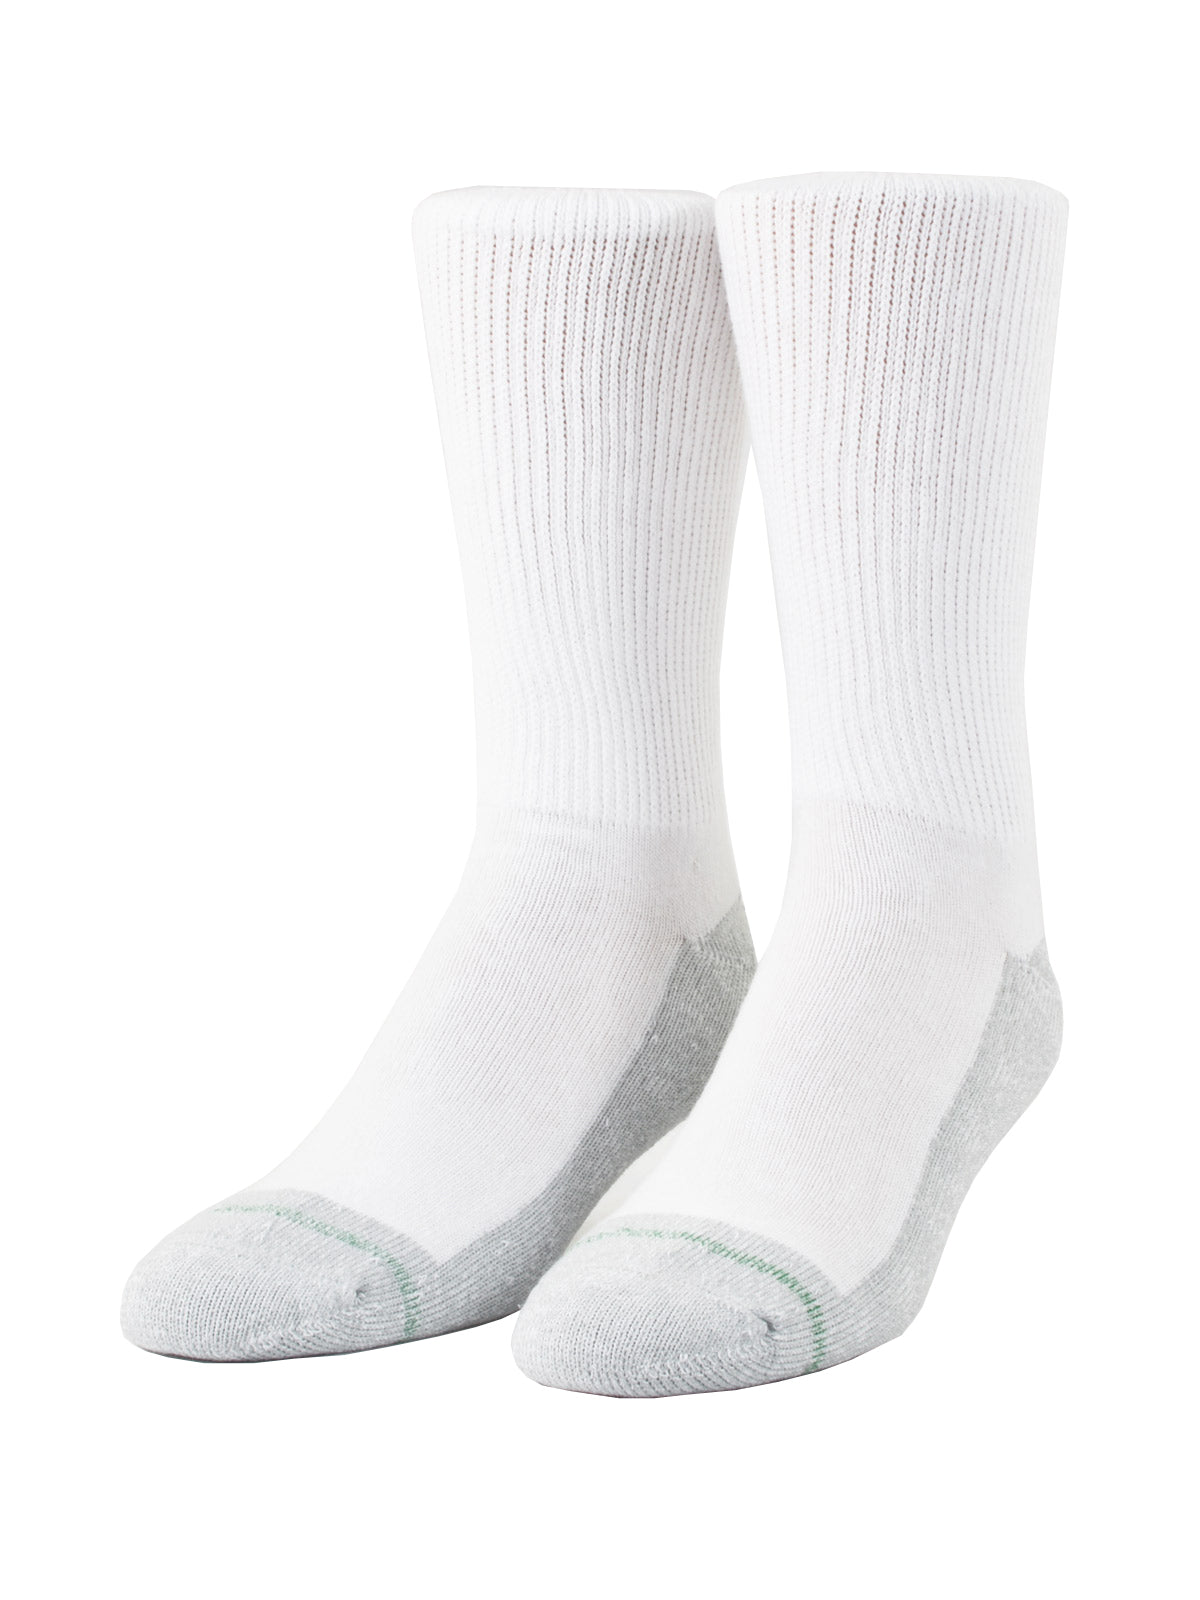 Loose Fit Stays Up Crew Athletic Socks in White - Medium (Size 8.5 - 11.5) - 780